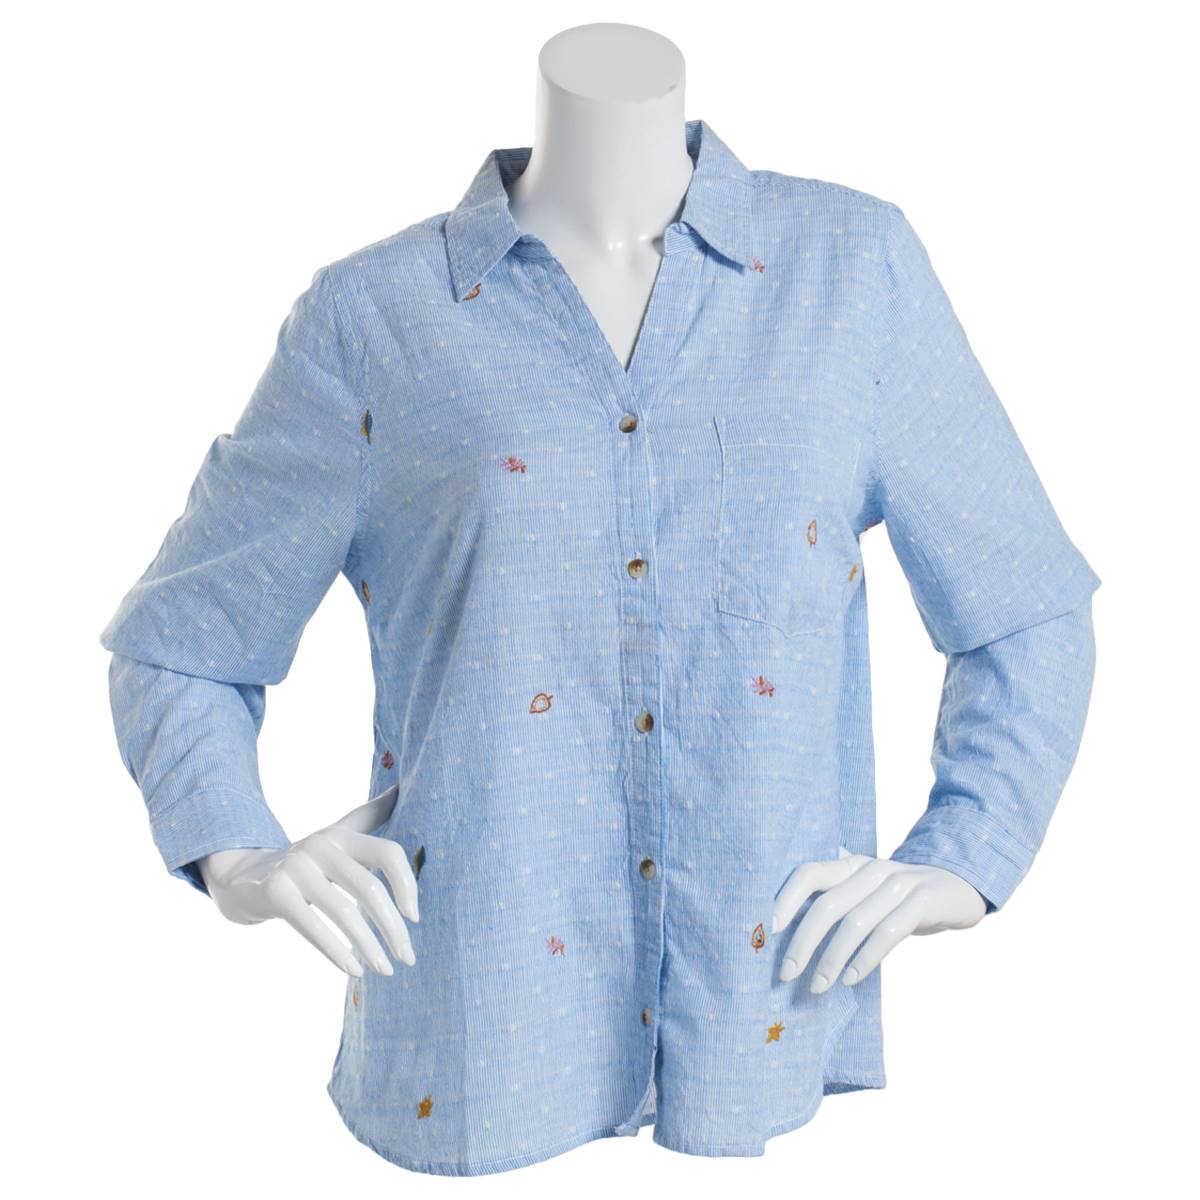 Petite Erika Leaf Embroidered Casual Button Down